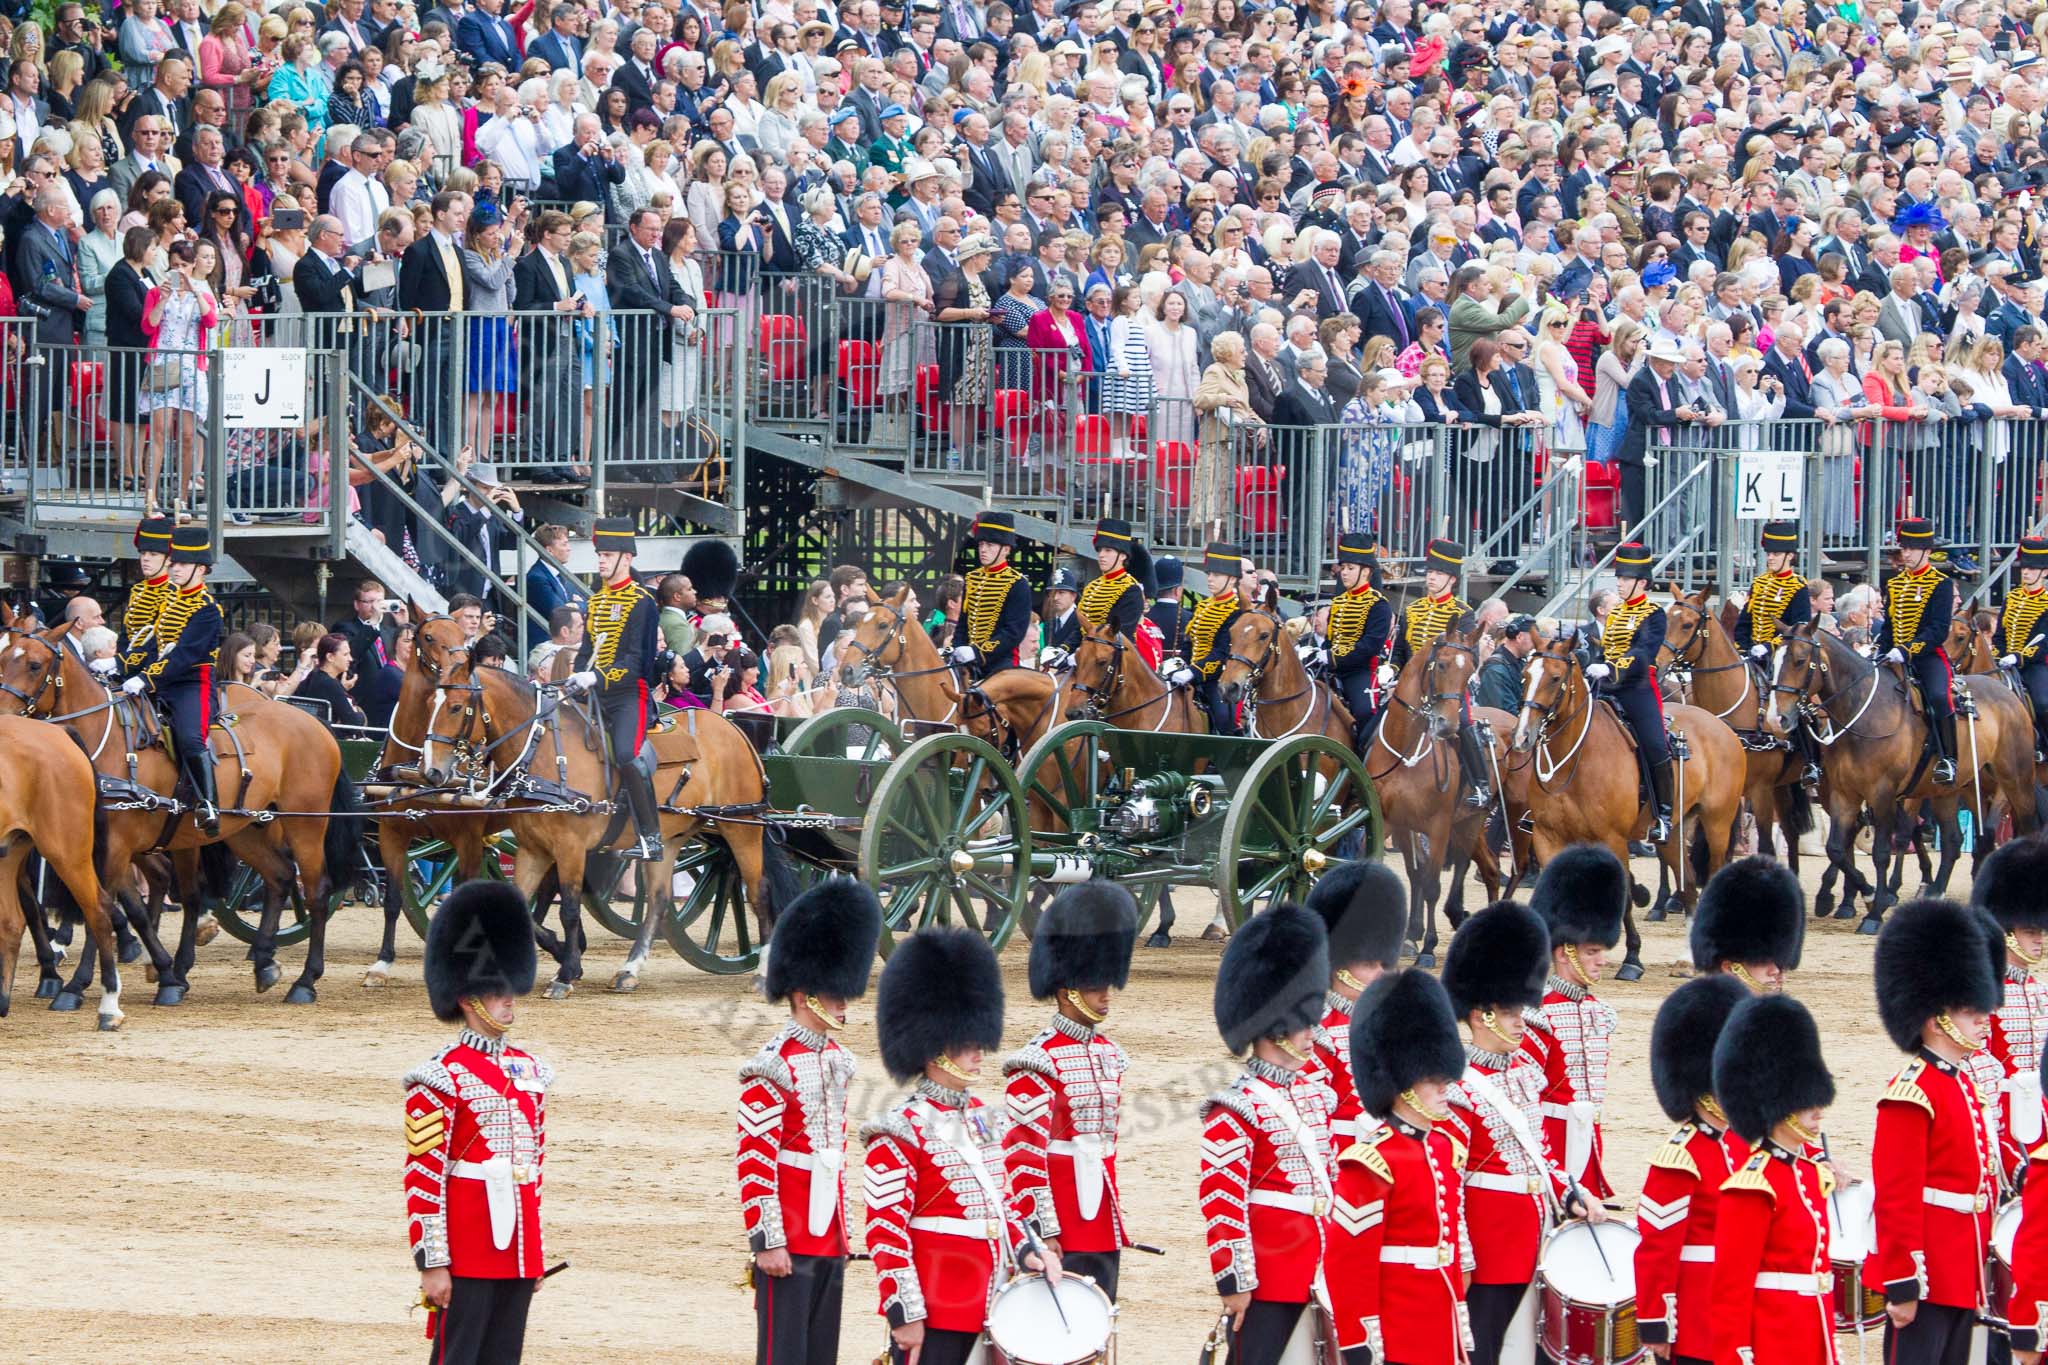 Trooping the Colour 2014.
Horse Guards Parade, Westminster,
London SW1A,

United Kingdom,
on 14 June 2014 at 11:55, image #738